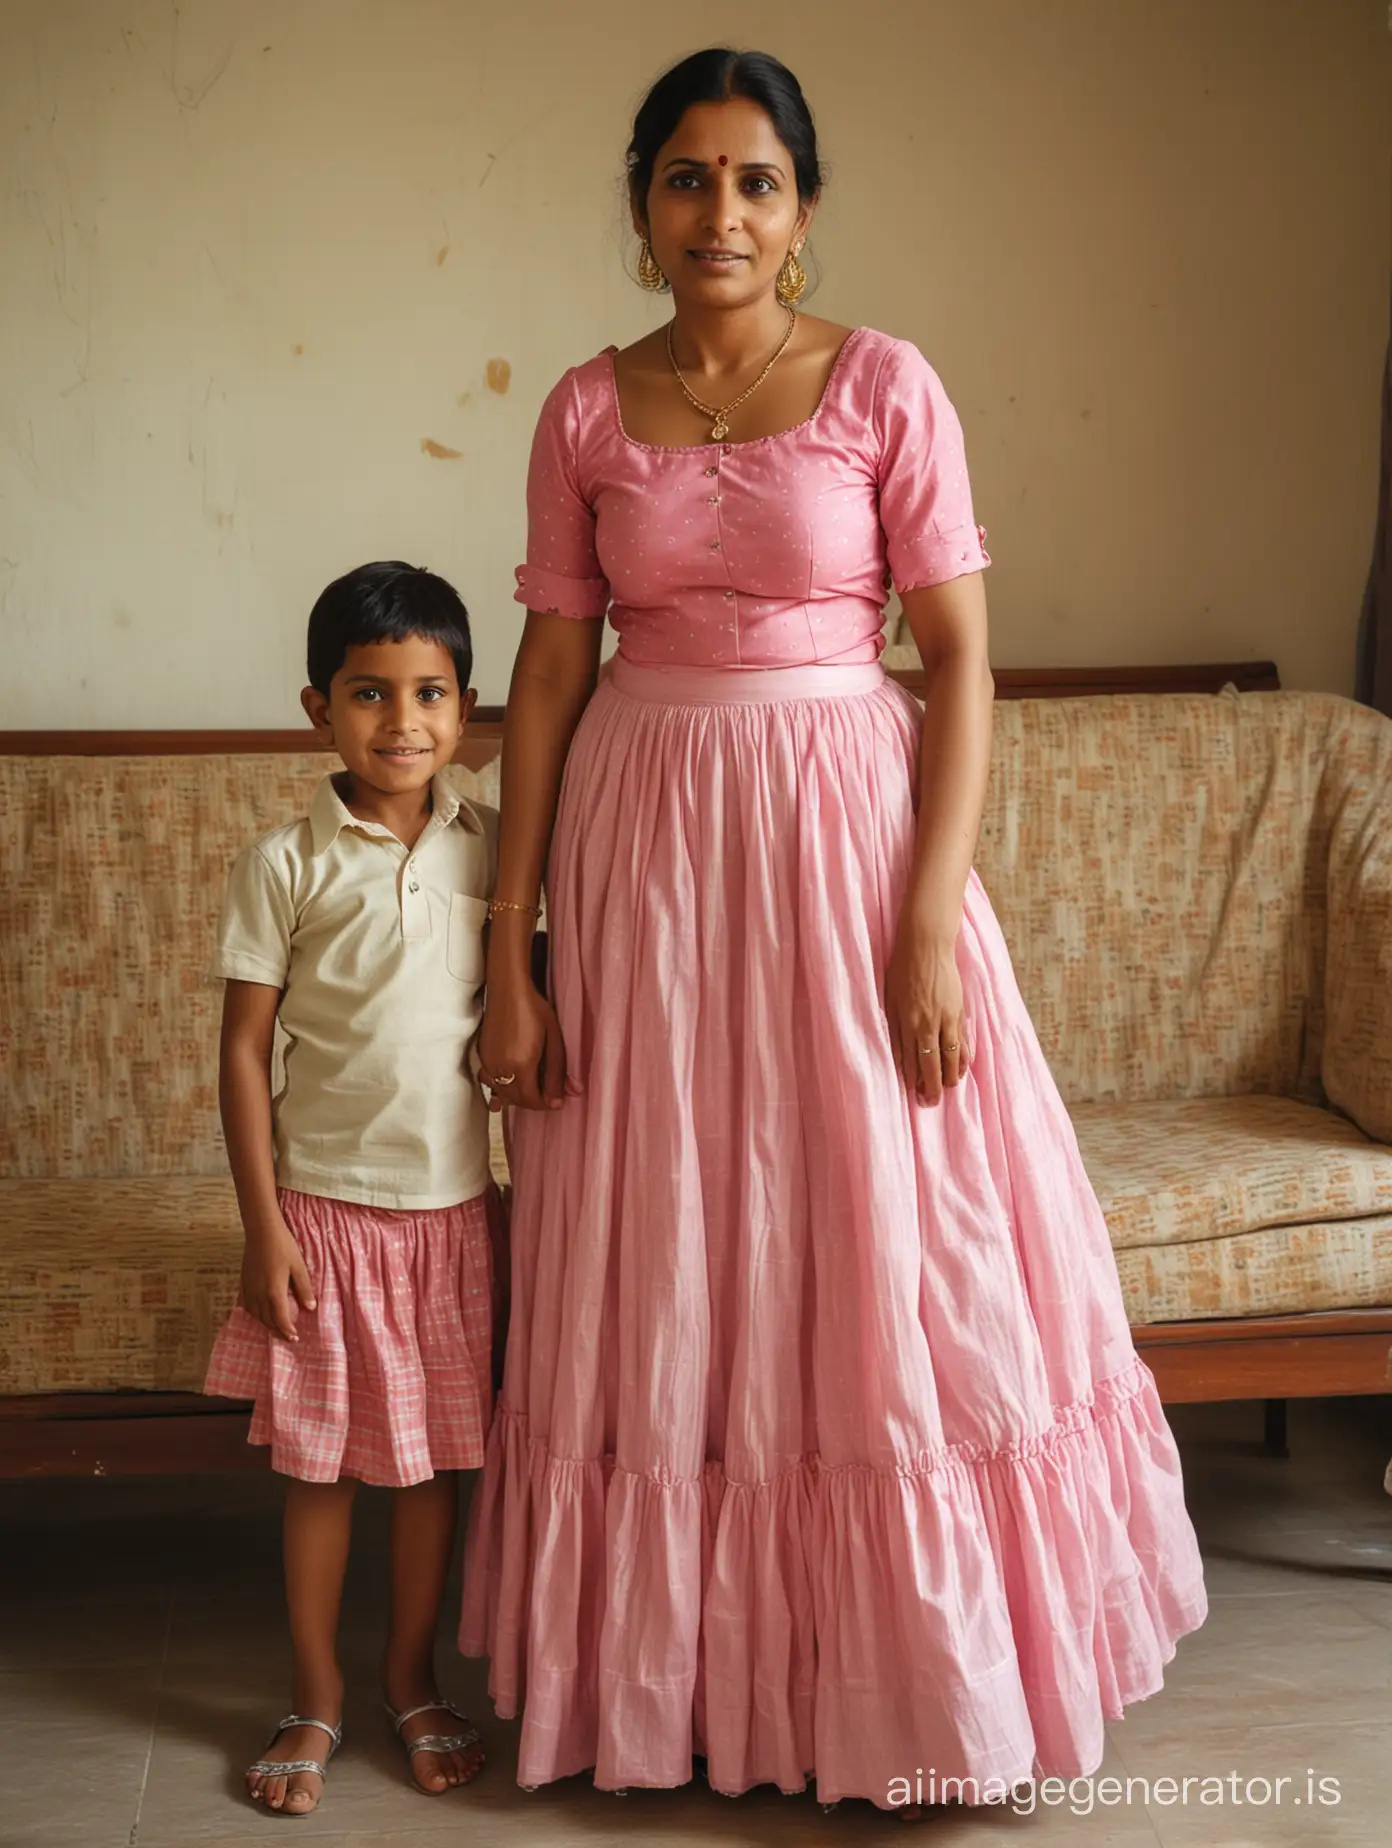 Desi village housewife aged 45 with young boy. in living room. wearing only petticoat